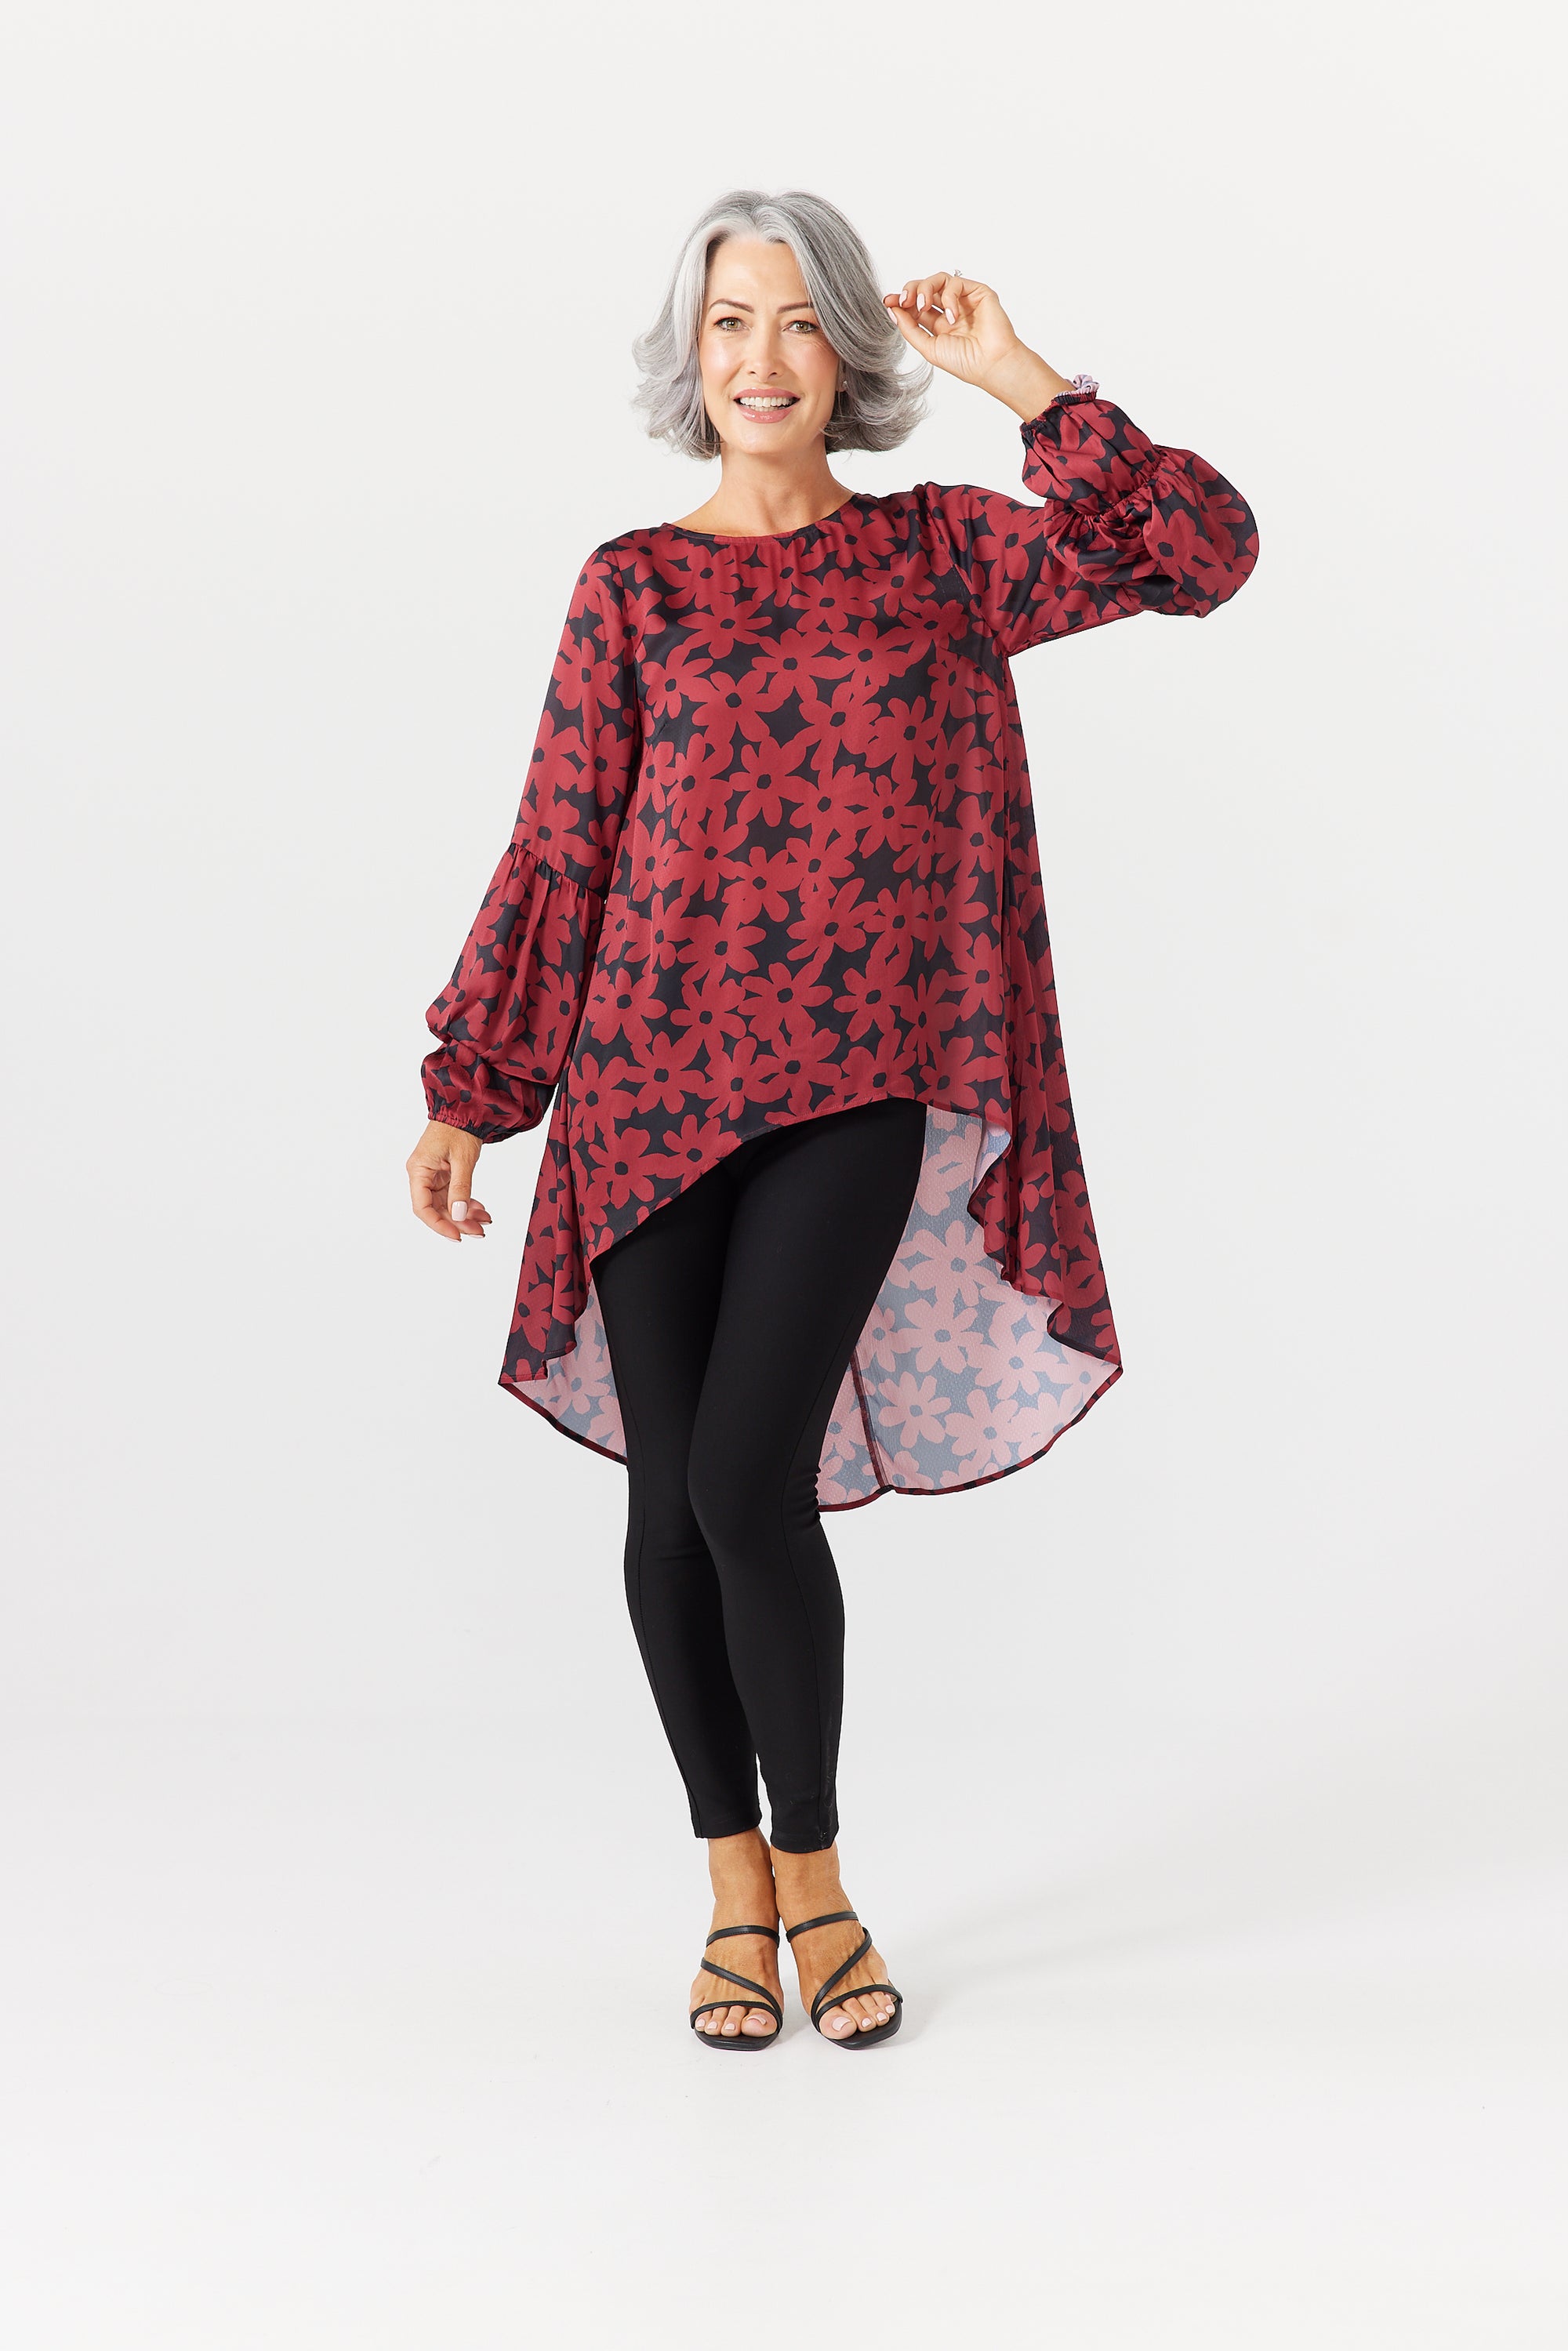 Cascade Long top in Cabernet Winter Bloom at Kindred Spirit Boutique and Gift